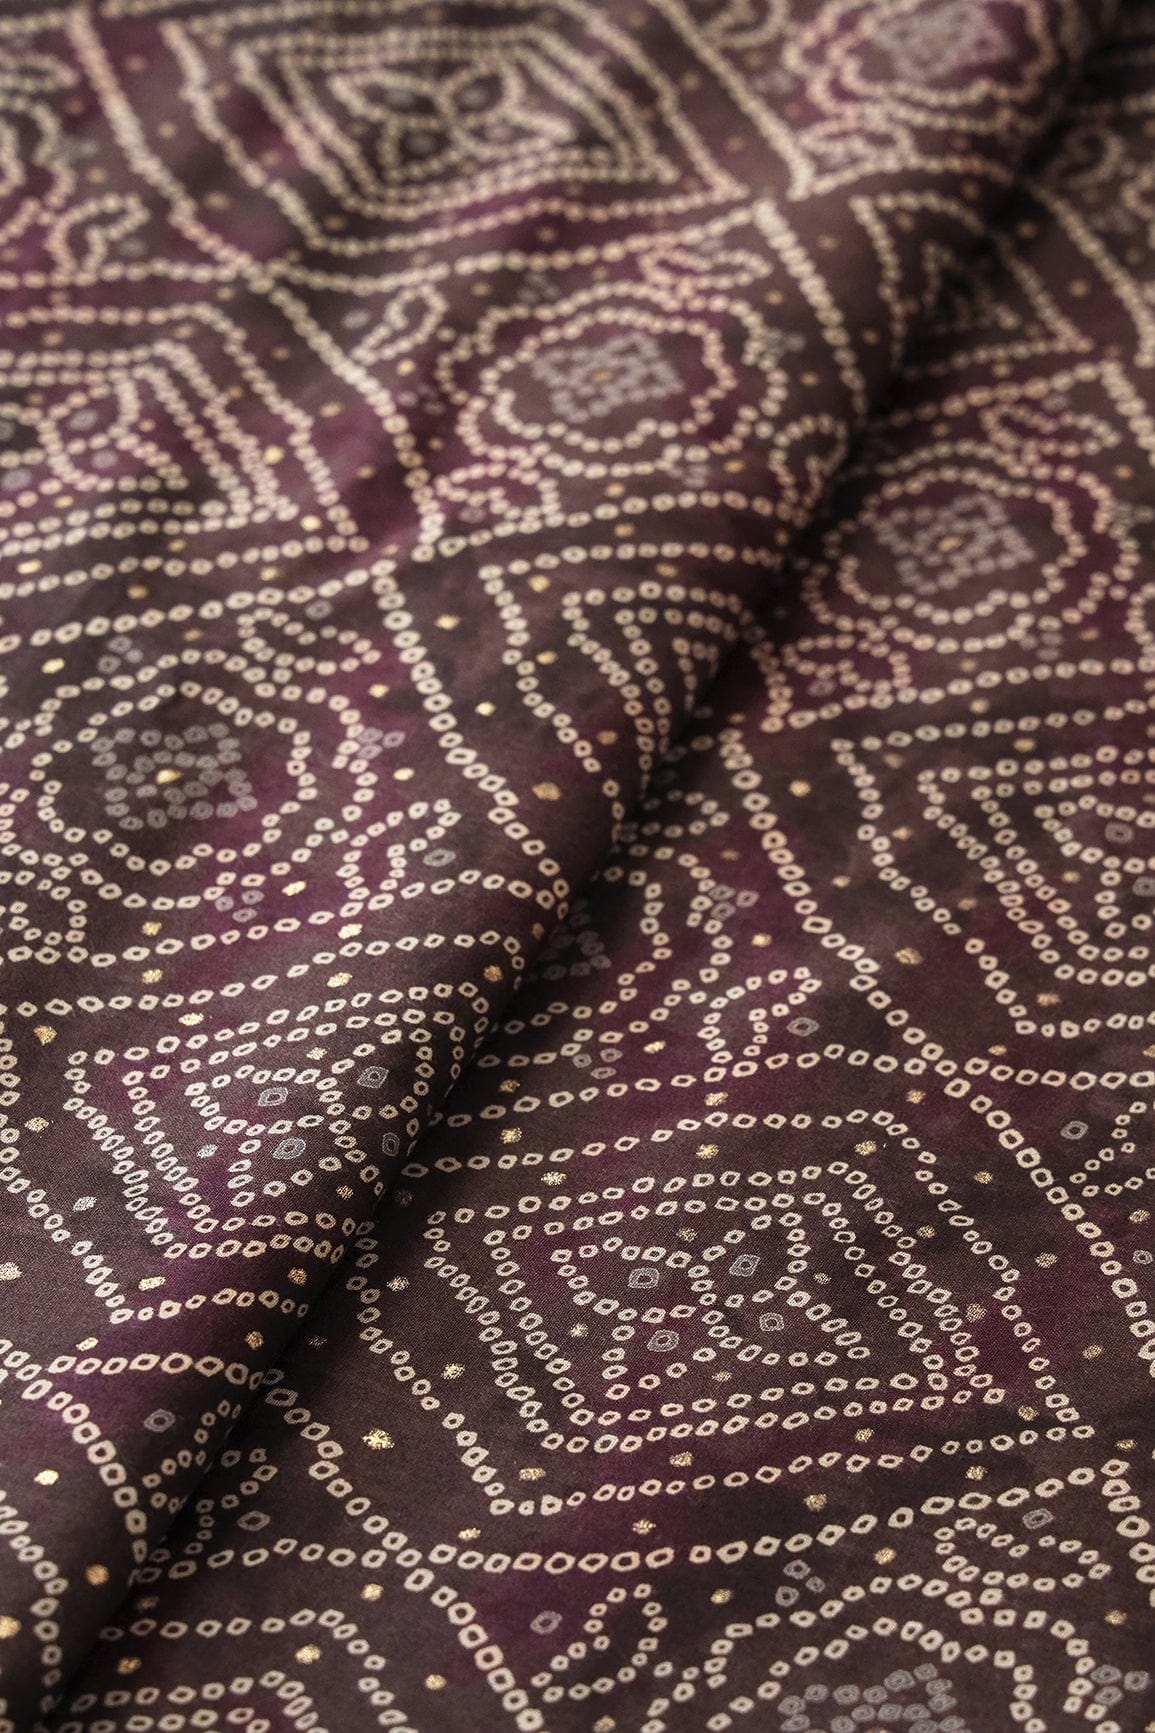 doeraa Prints Dark Brown And Beige Bandhani Pattern With Foil Print On Pure Mul Cotton Fabric